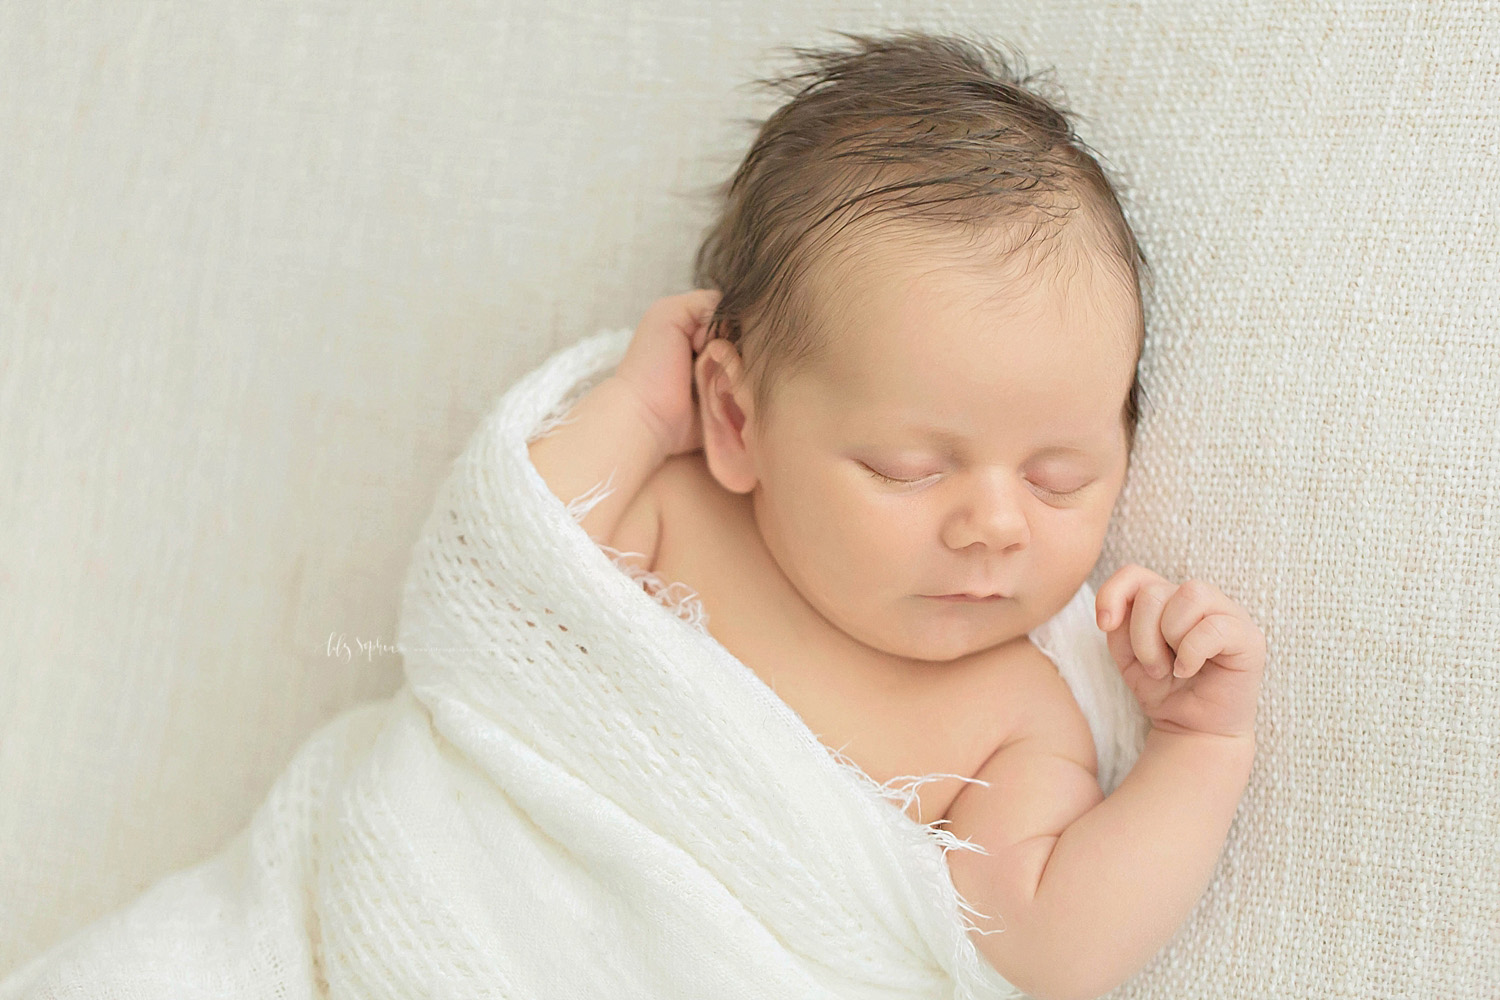  Image of a sleeping, newborn, baby, boy, wrapped in a waffle weave, white blanket, with his hands by his head.&nbsp; 